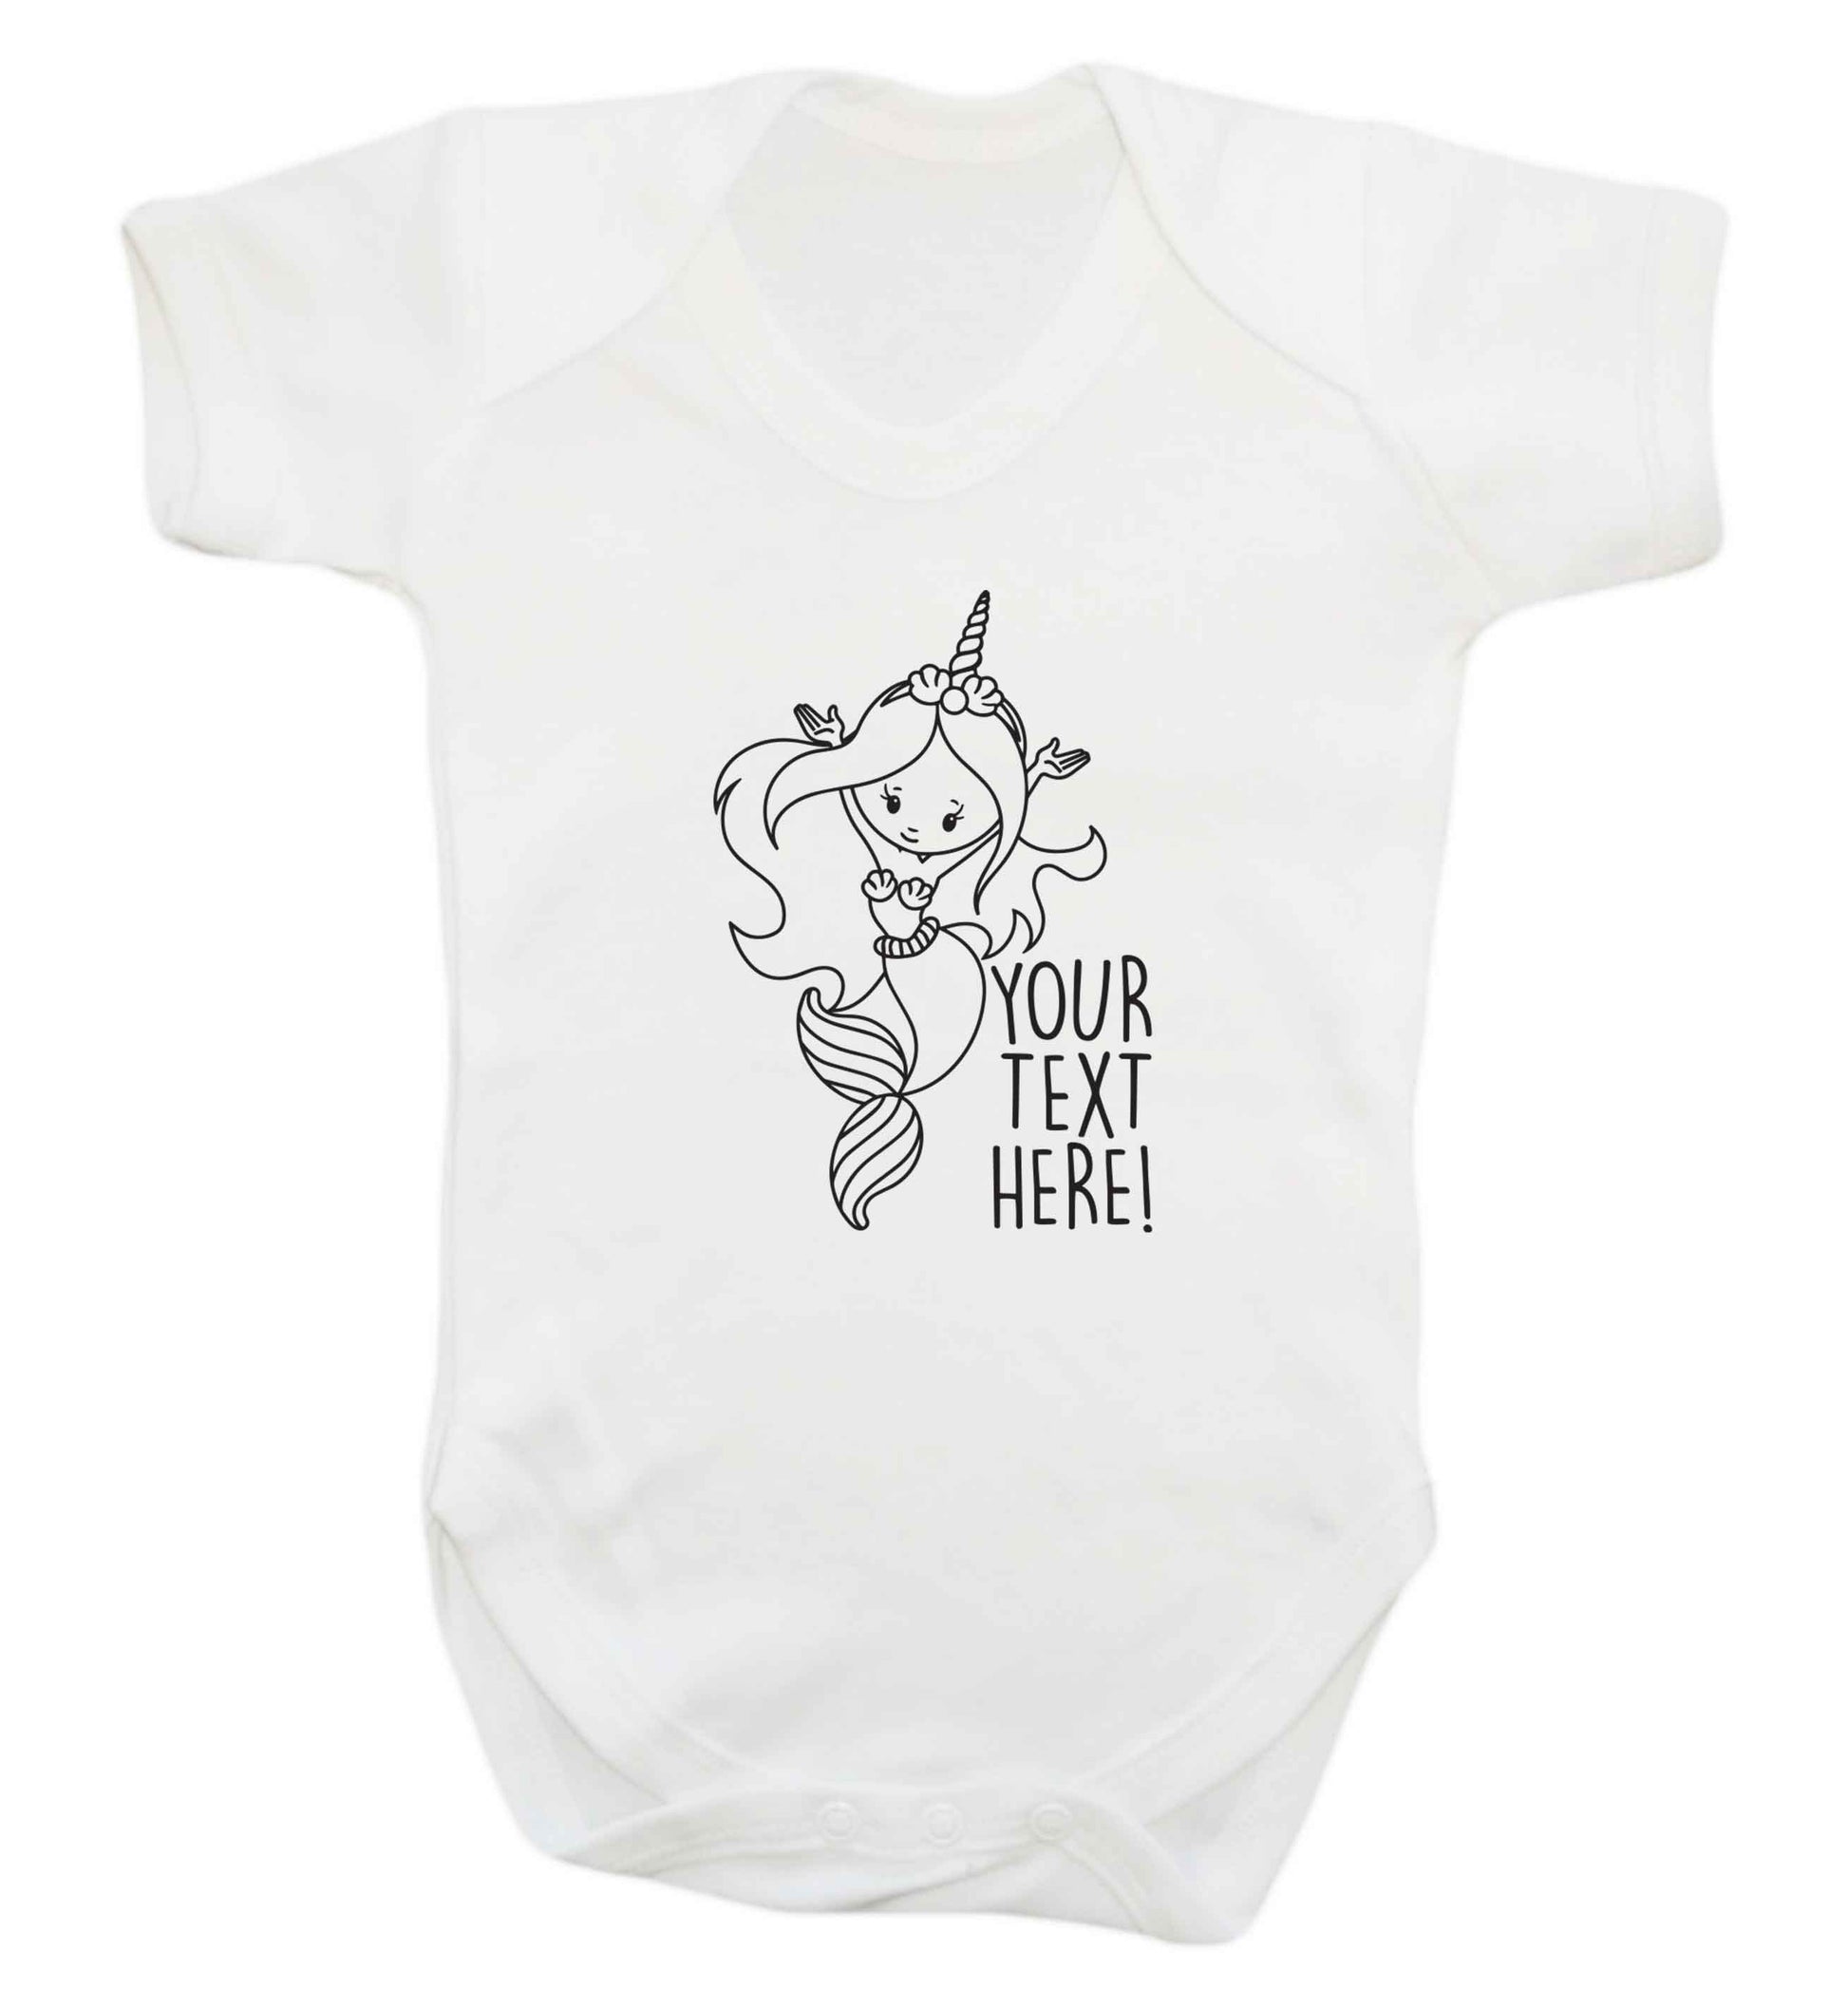 Mermaid with unicorn headband any text baby vest white 18-24 months